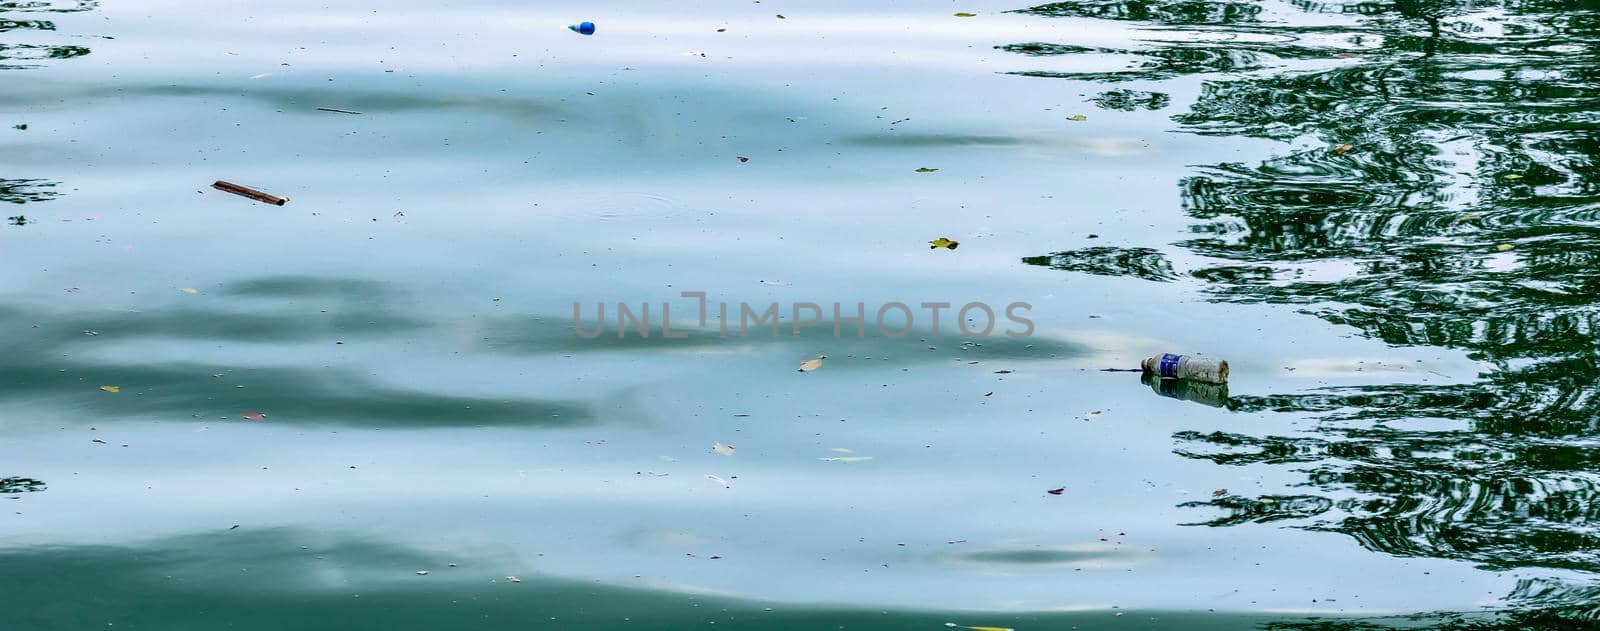 Plastic garbage in a river polluting the waters